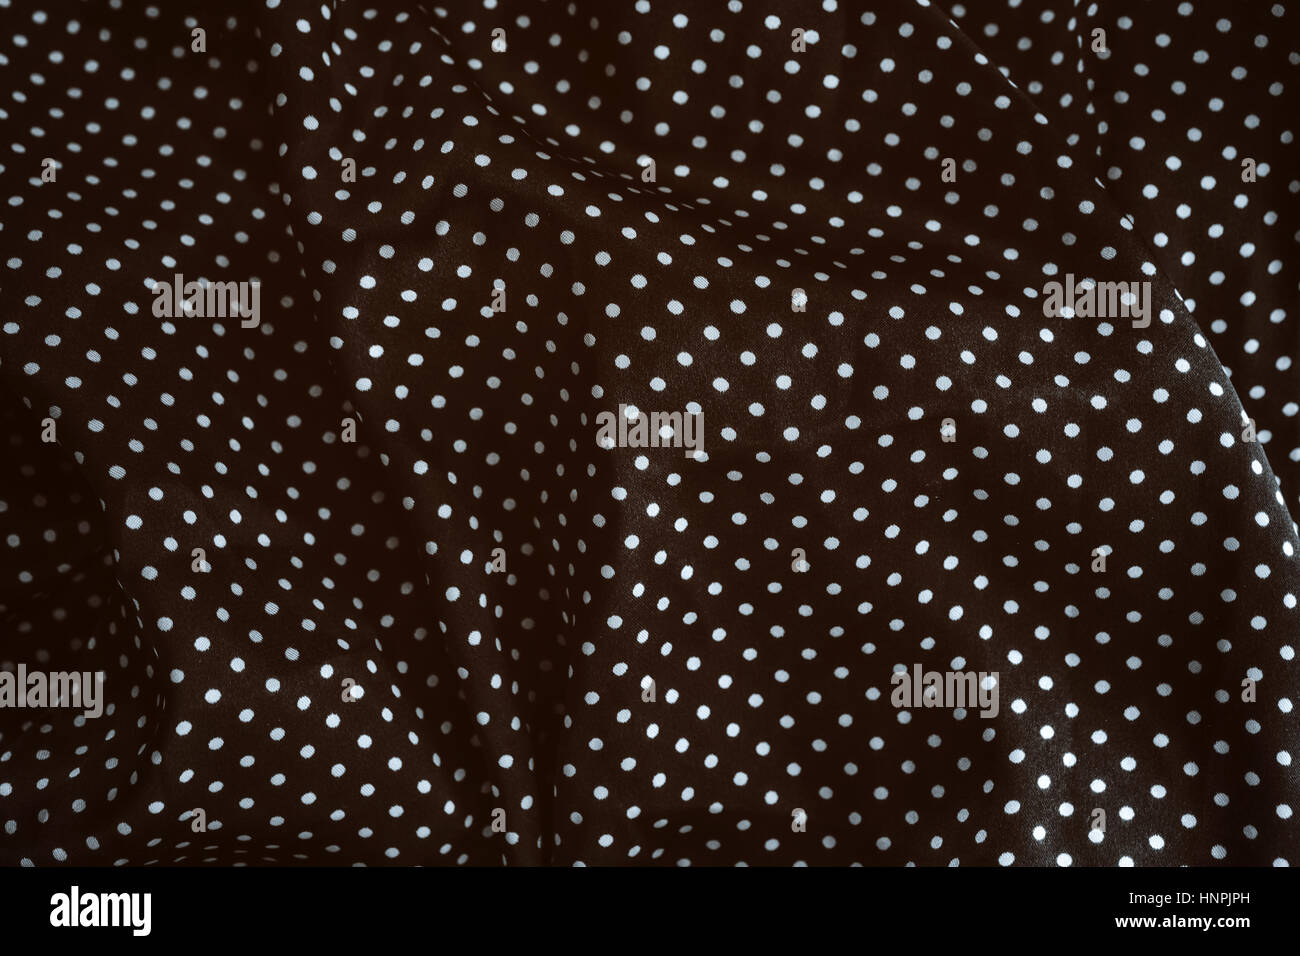 Texture of silk fabric with polka dots Stock Photo